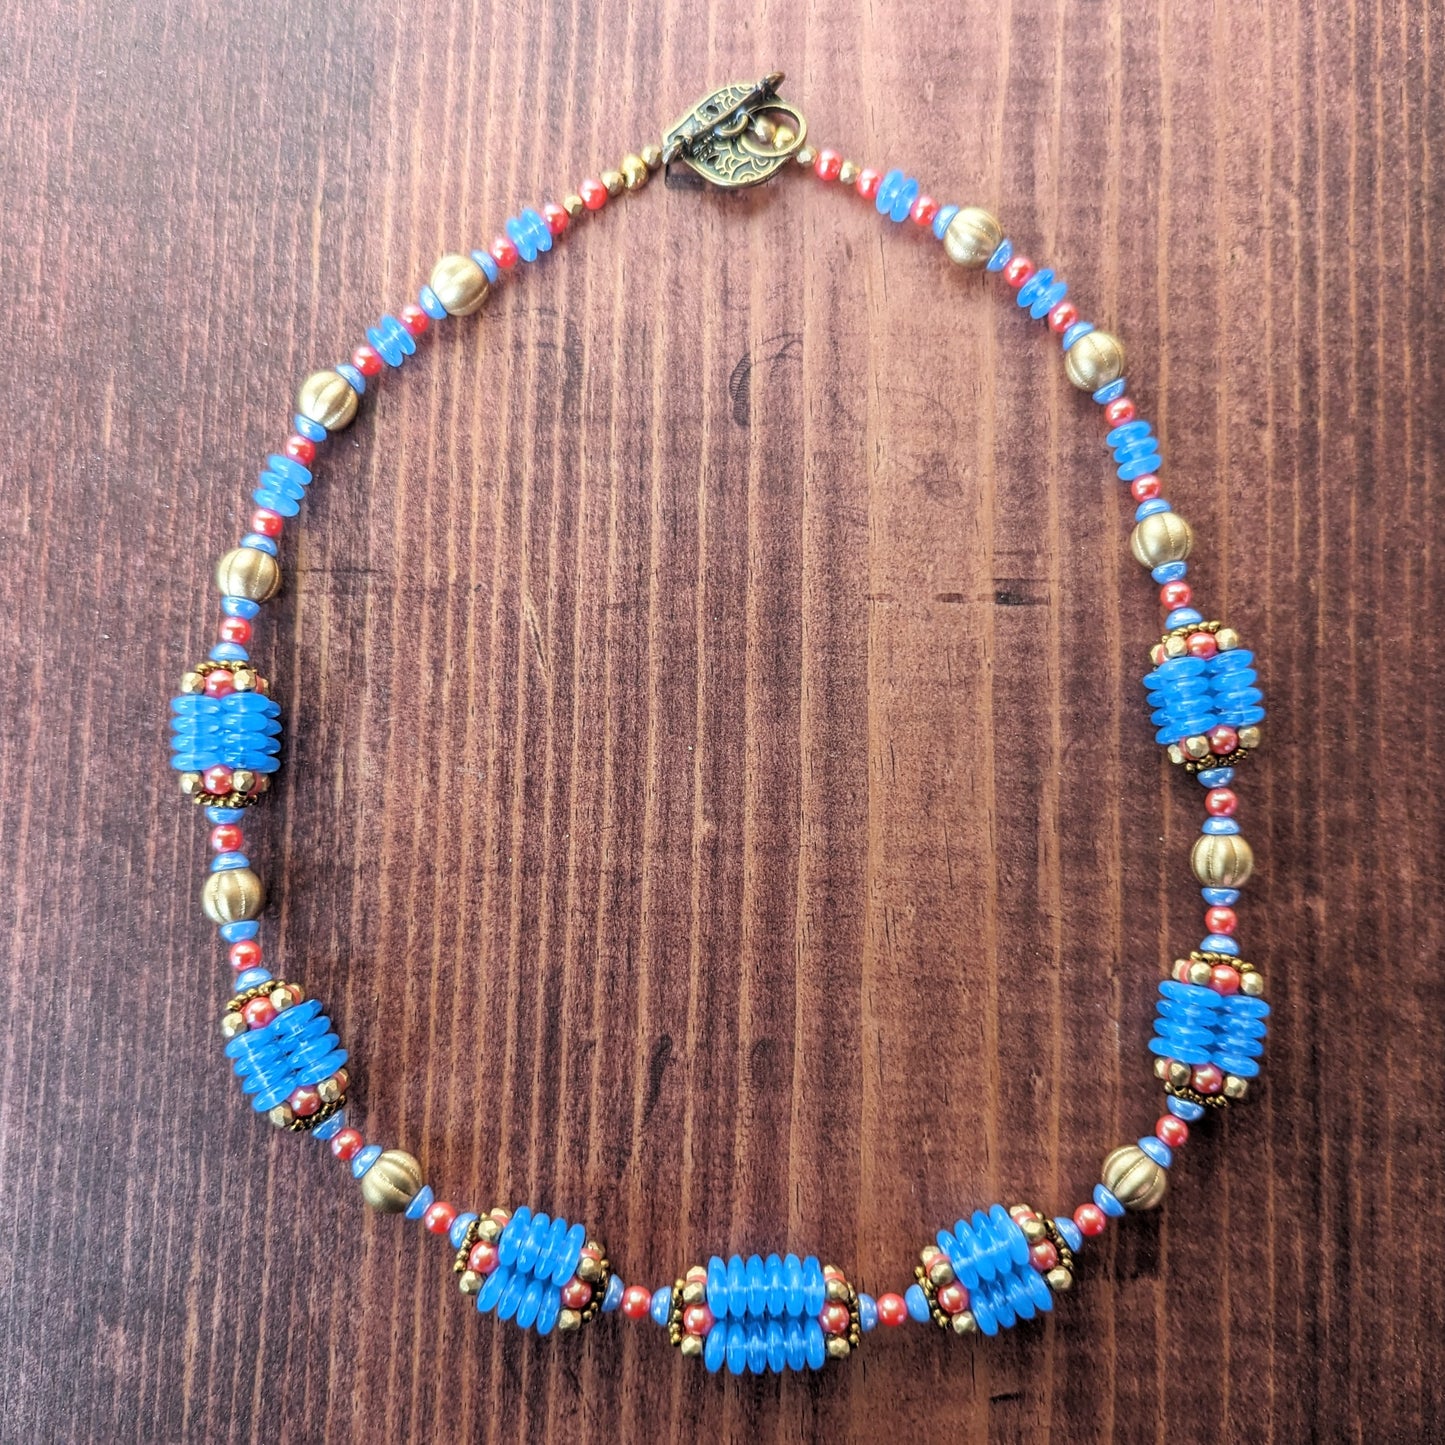 A necklace with bright opal blue, gold, and orangey red beads is laid out in a  on circlea reddish wood board. A teardrop shaped brass toggle clasp is visible. The necklace has nine beaded beads that are comprised of four columns of blue discs and capped with gold and red beads